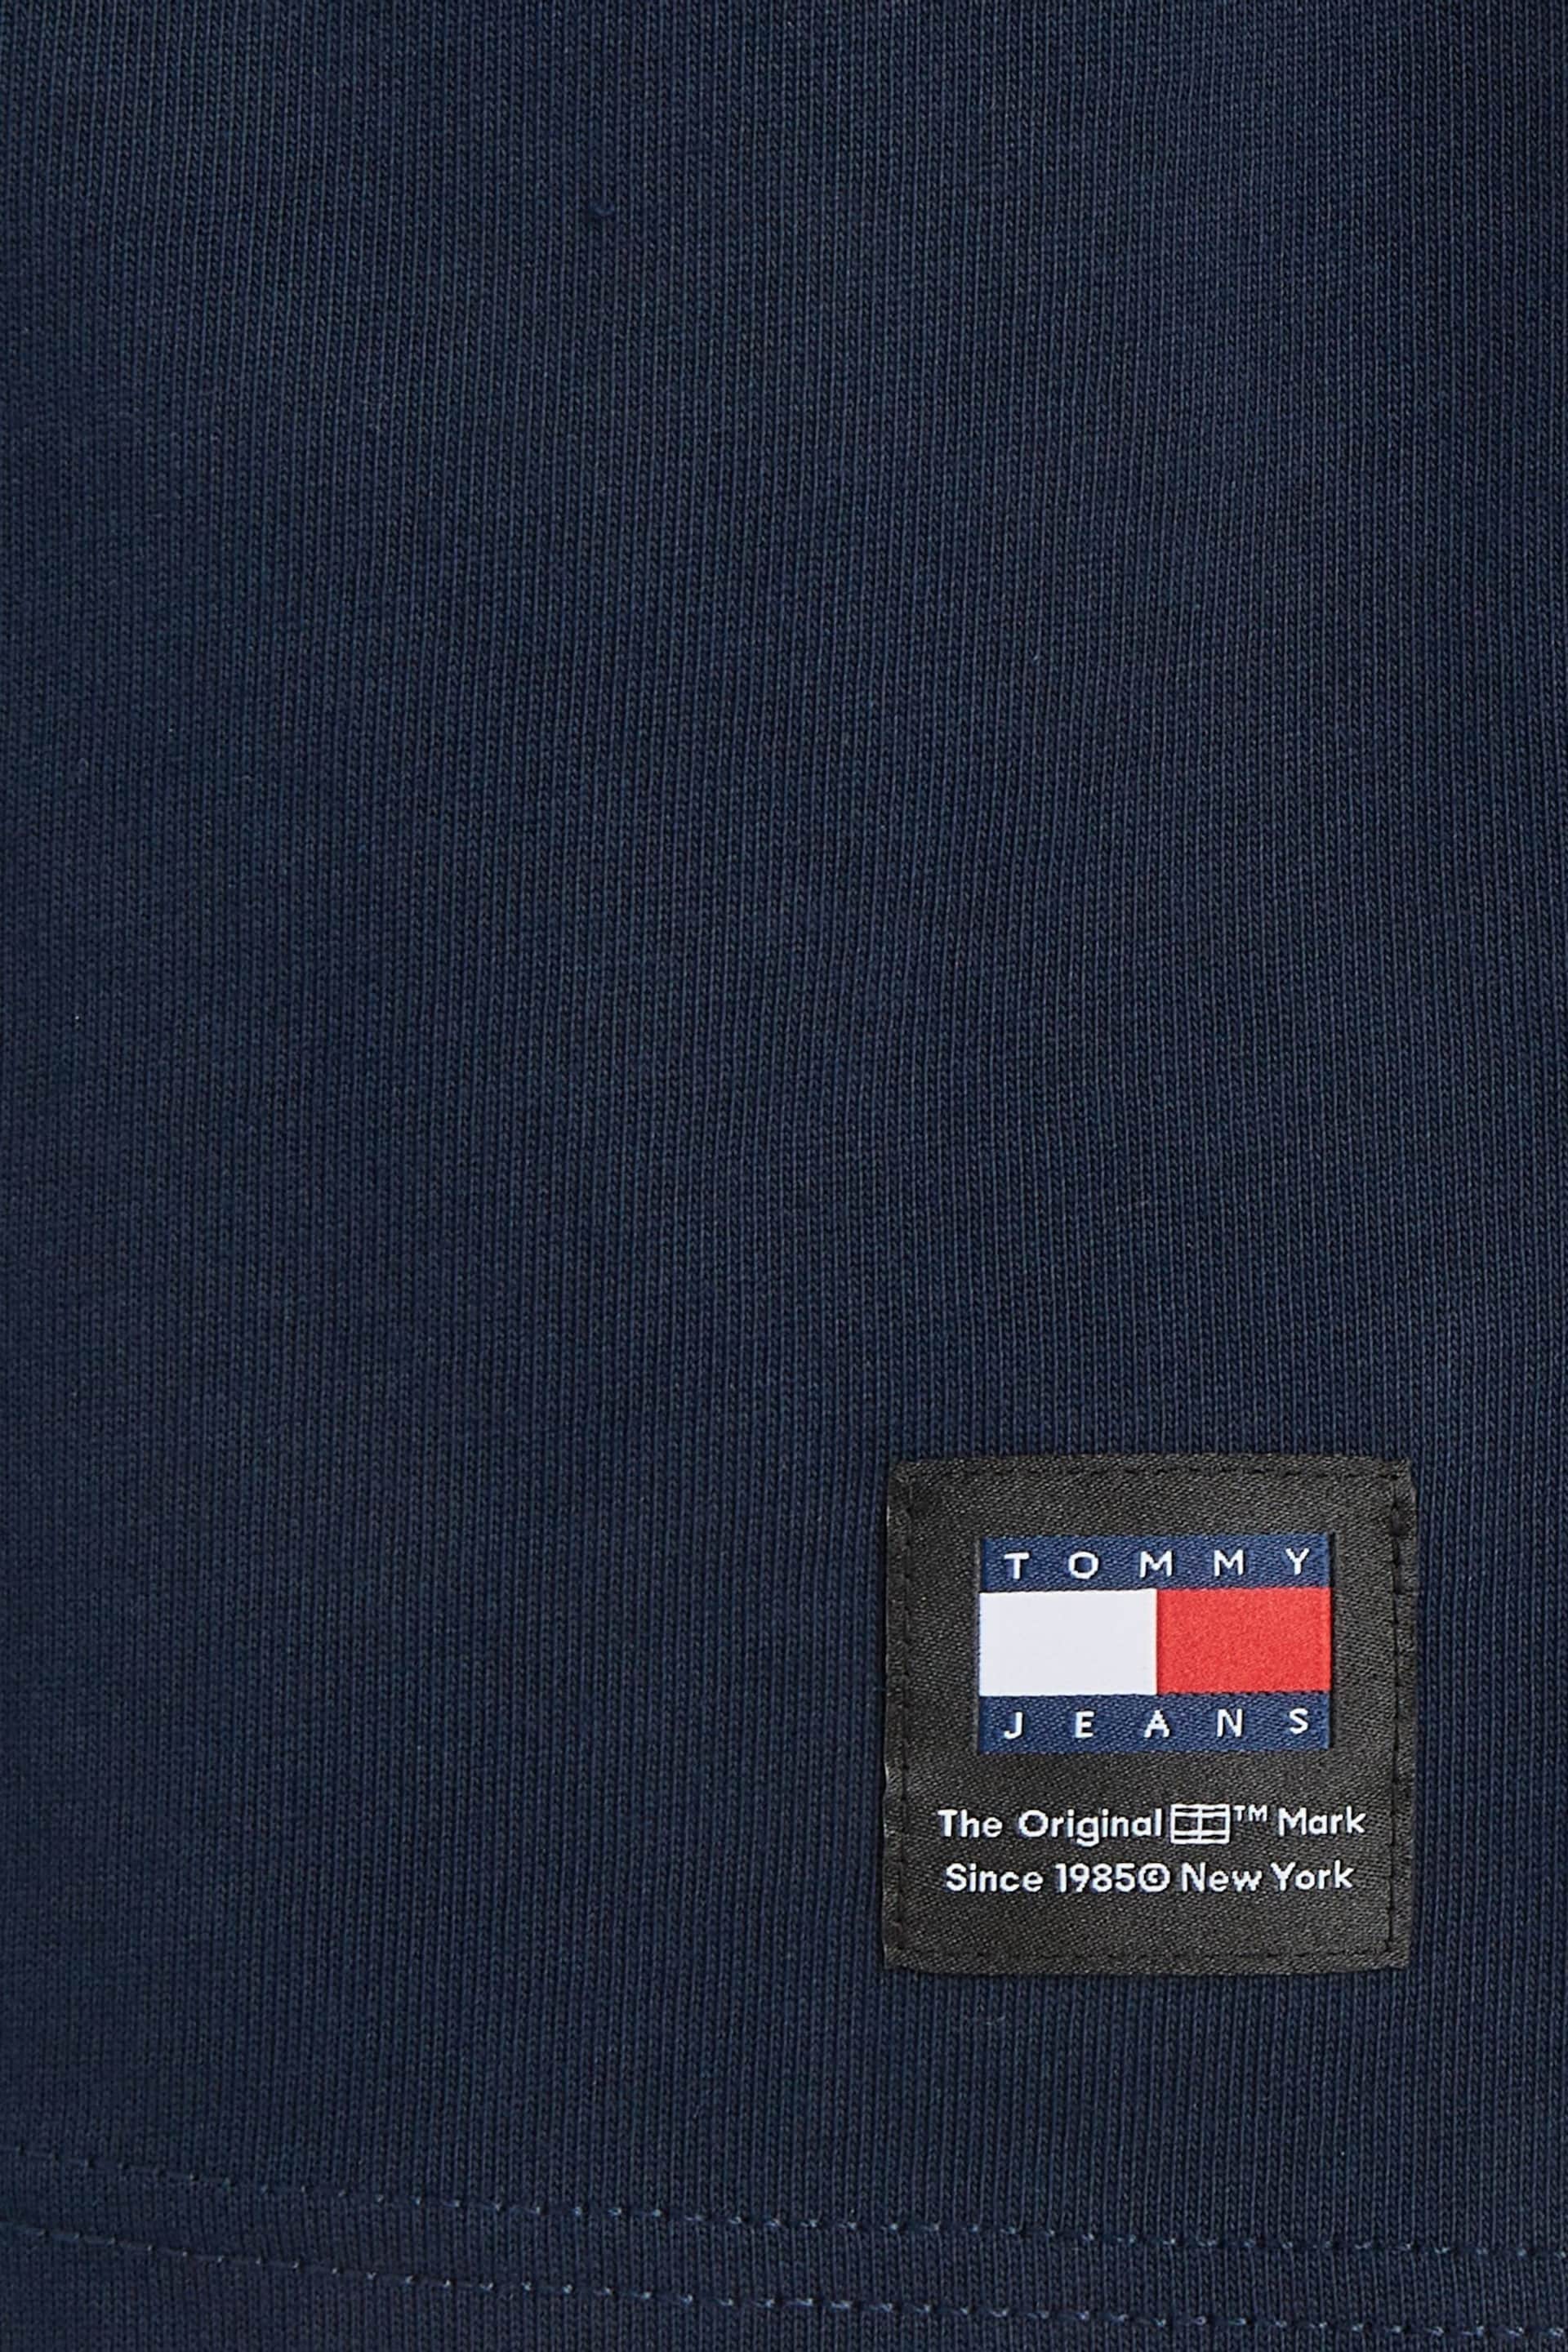 Tommy Jeans Blue Oversized Classic Rugby Shirt - Image 6 of 6